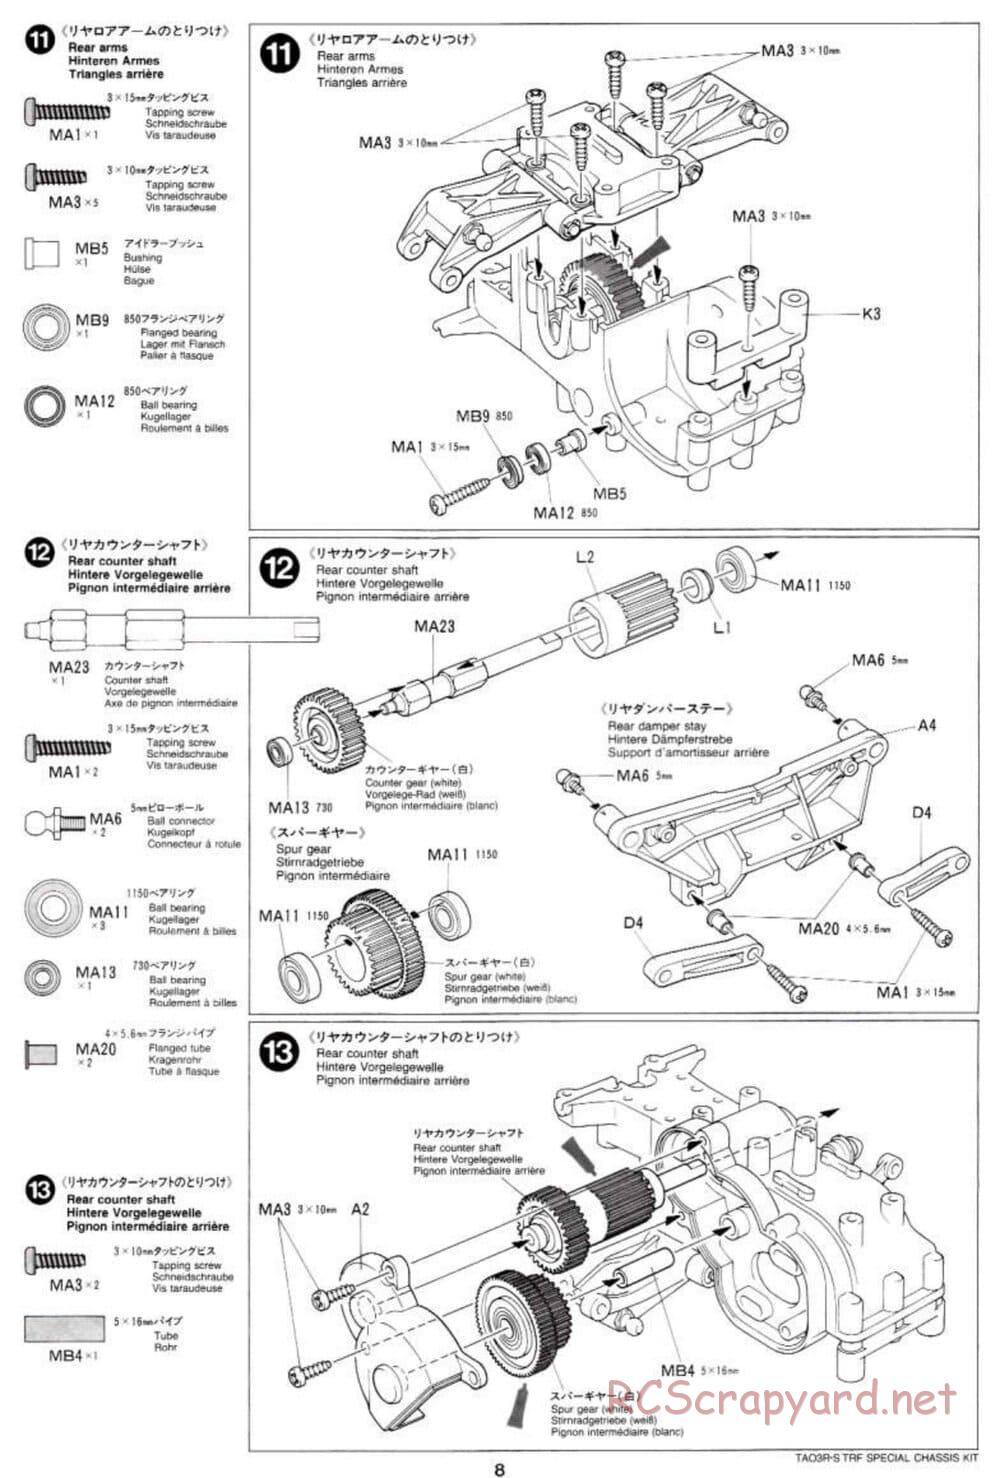 Tamiya - TA-03RS TRF Special Chassis - Manual - Page 8